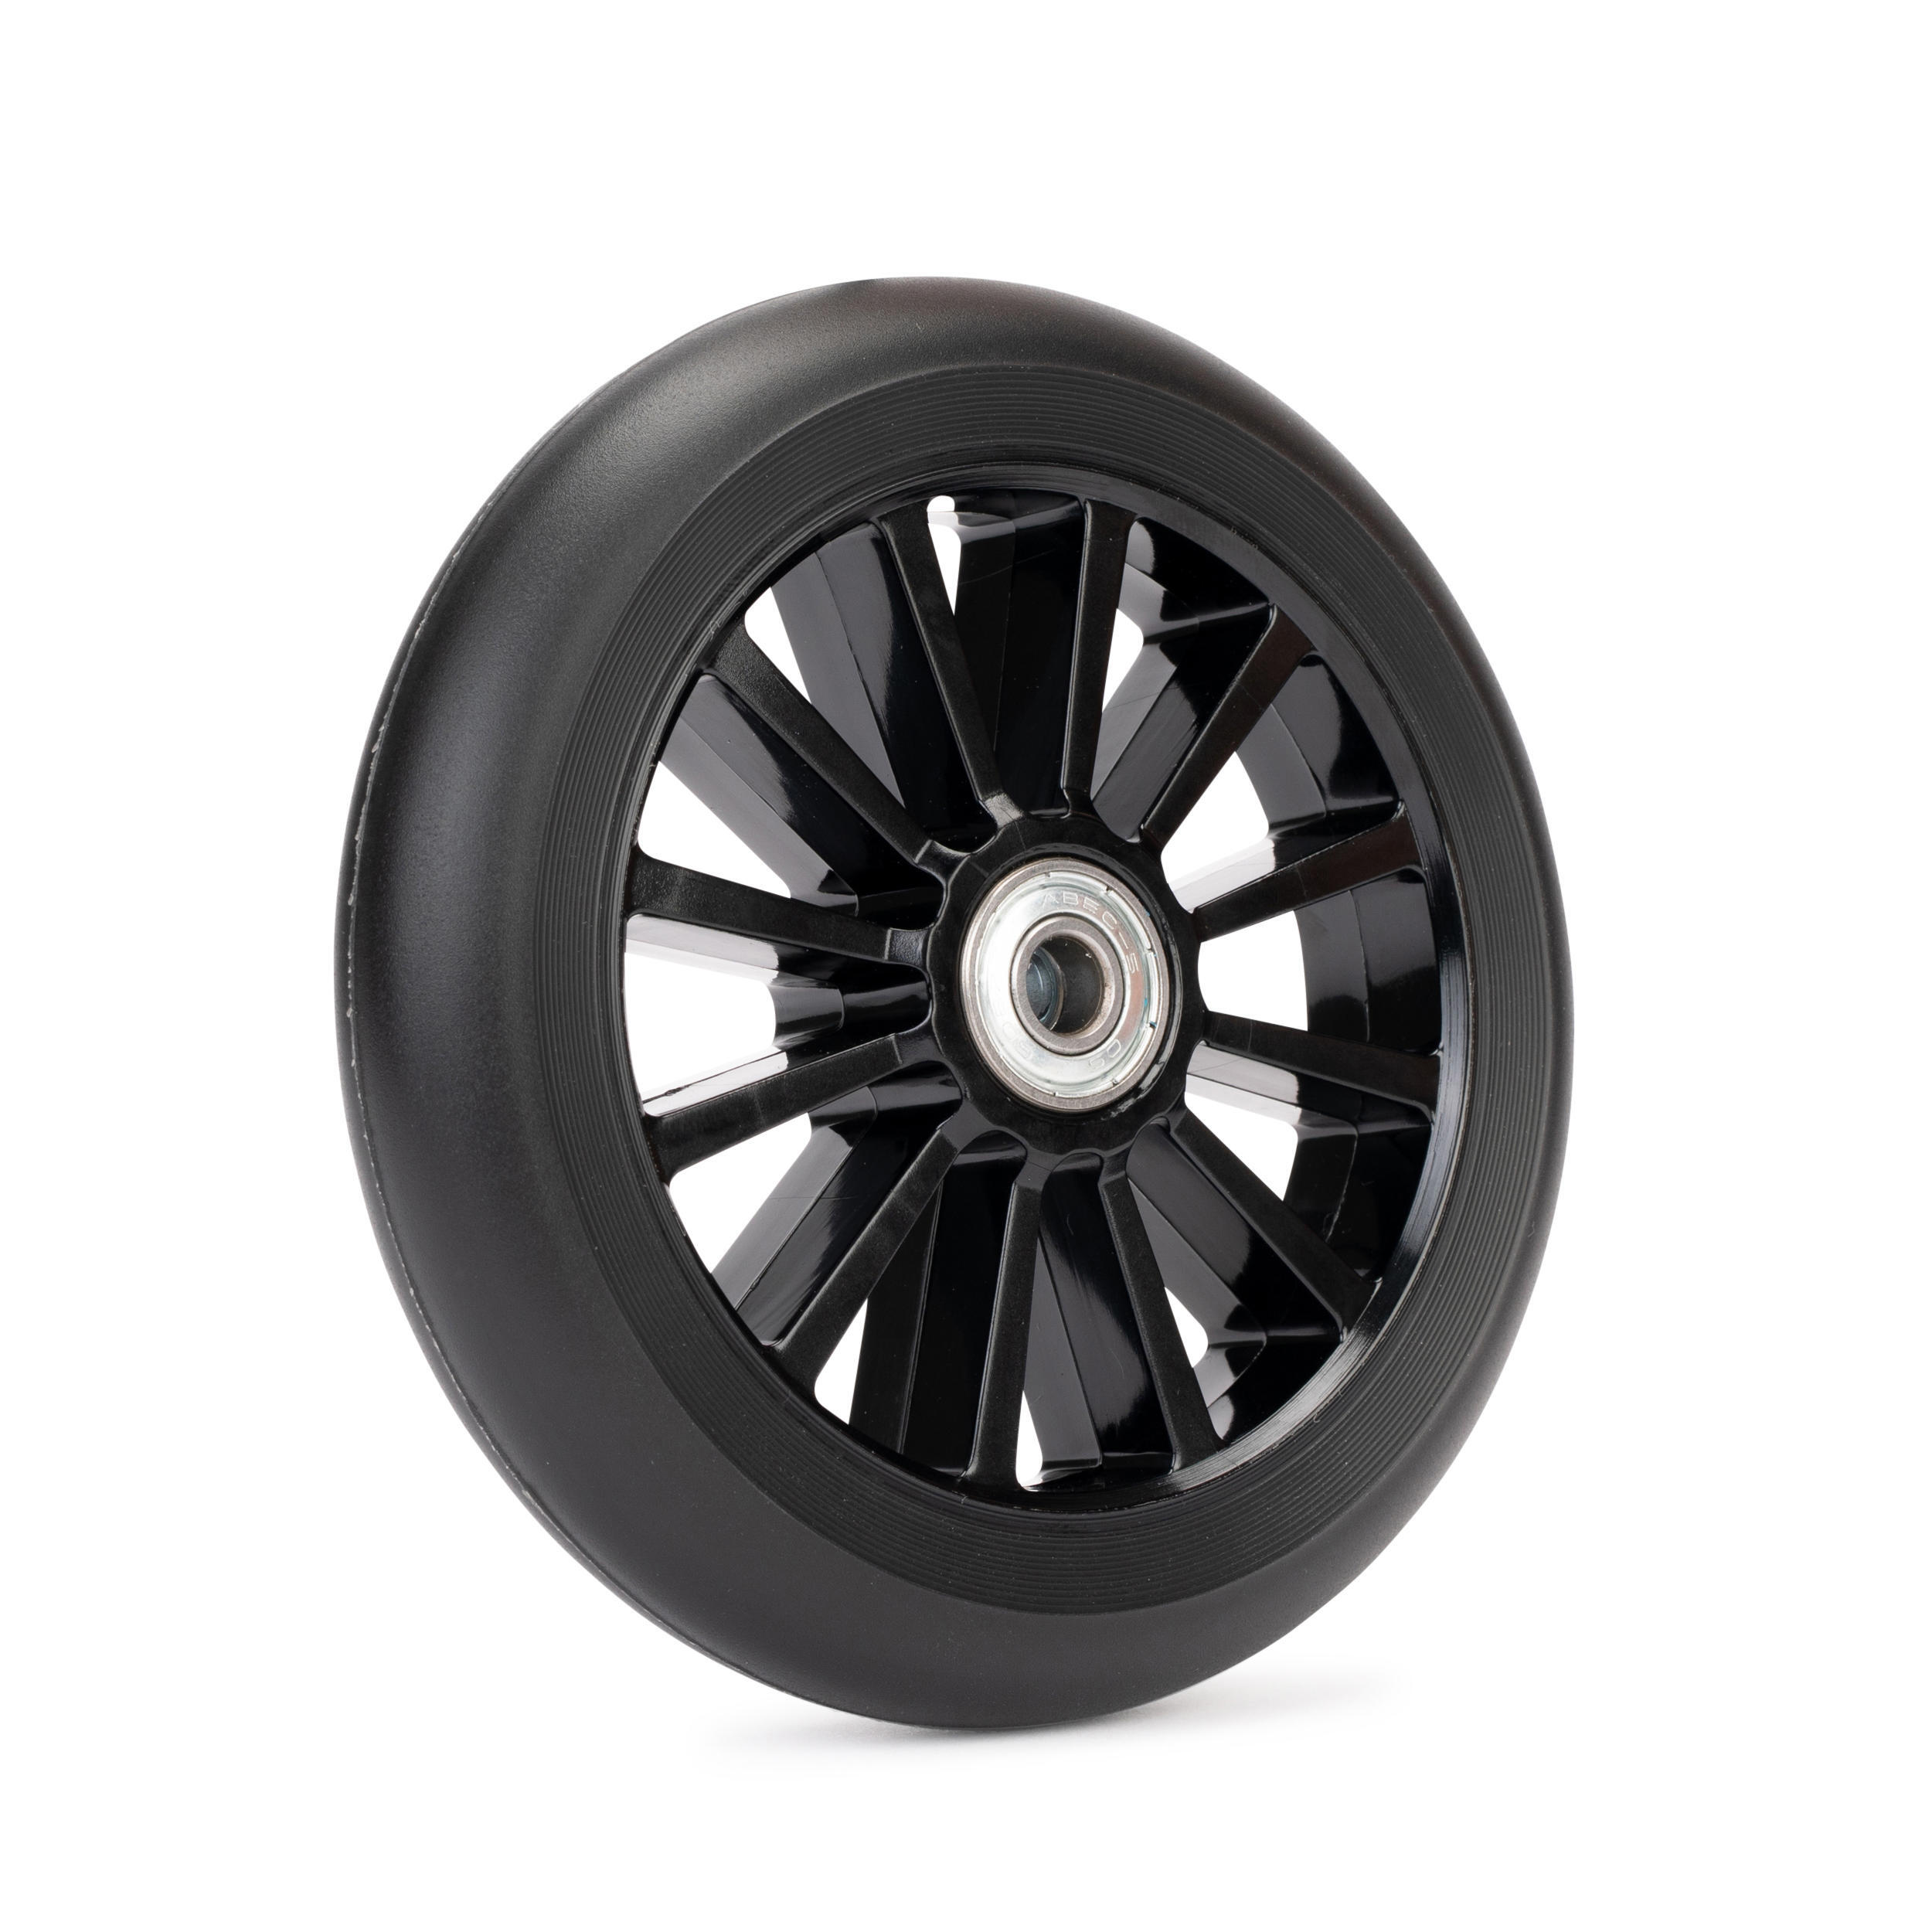 1 Wheel + Bearing for MID 1, MID 3, MID 5, PLAY 3 and PLAY 5 (front) Scooters 2/3